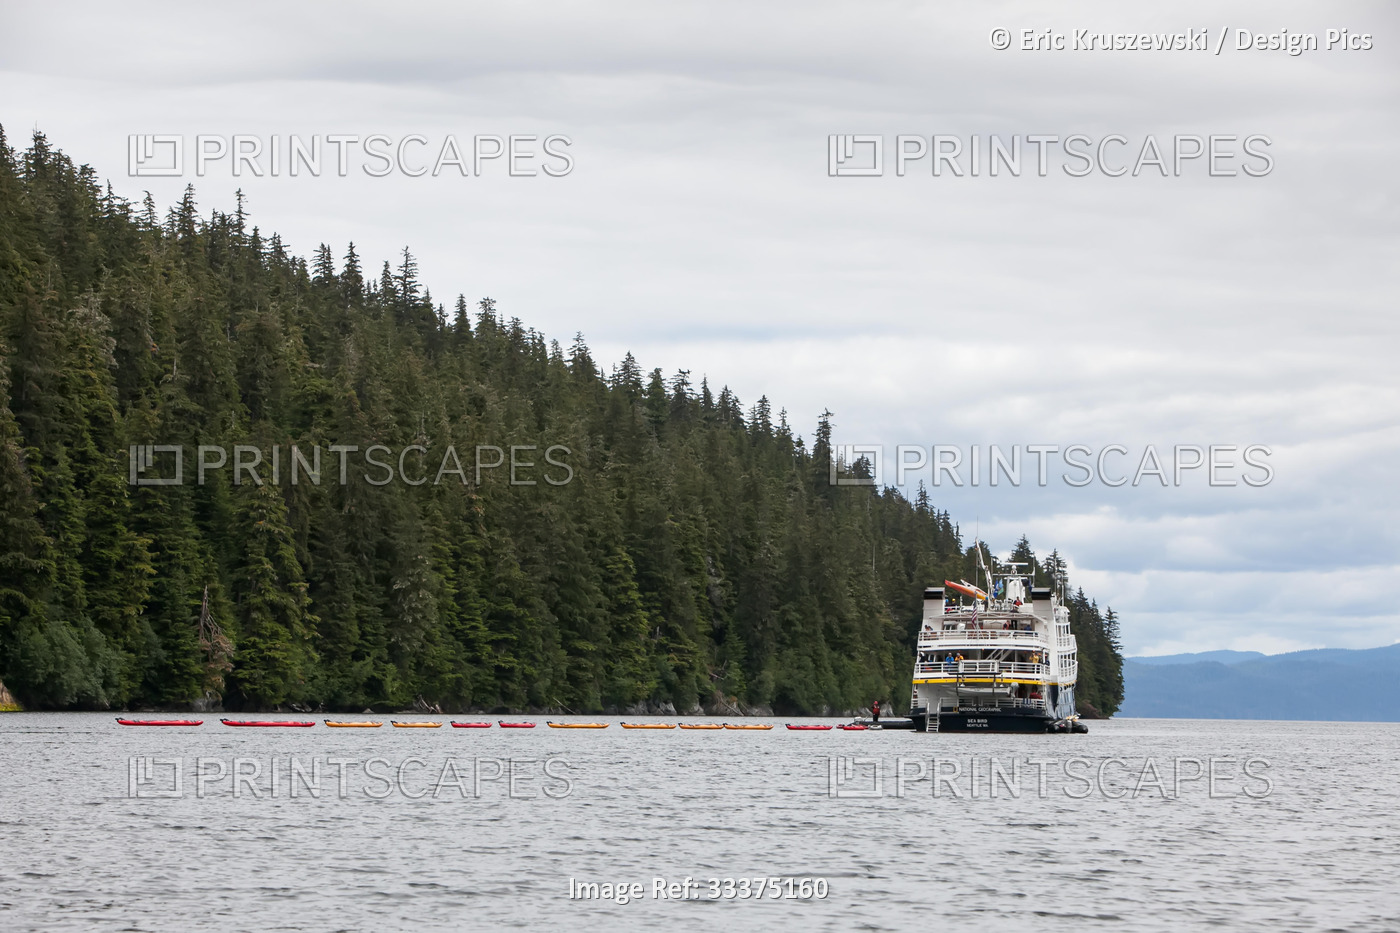 Near a tree lined mountain, an expedition cruise ship, collects kayaks from the ...